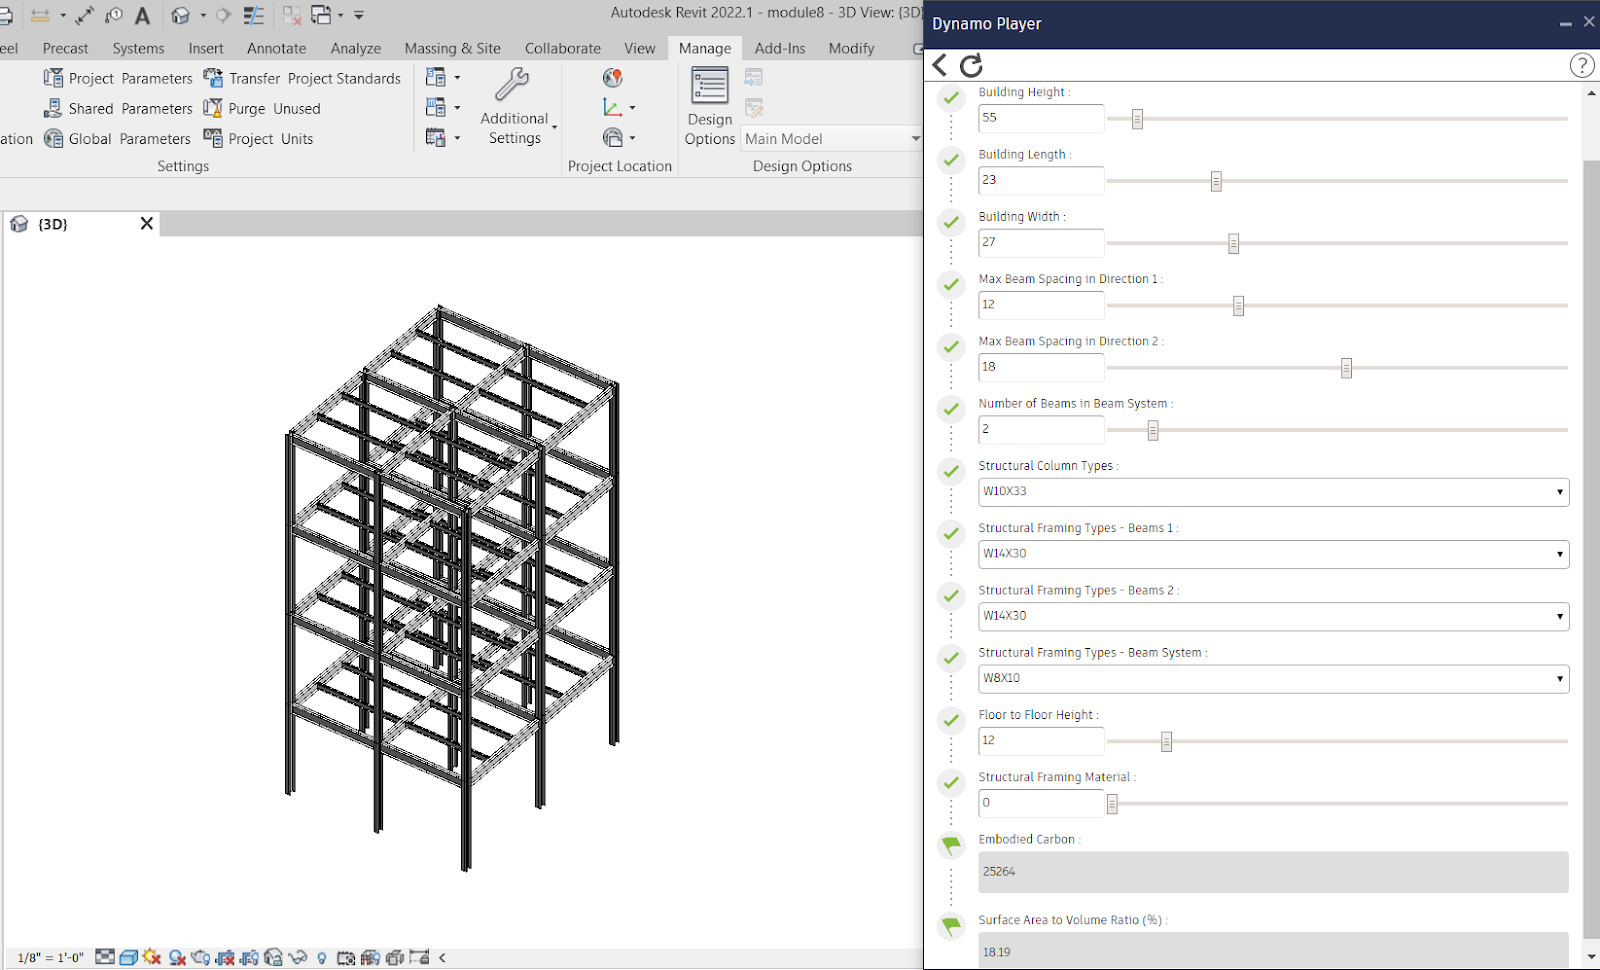 Inputs and results for a steel structural framing system